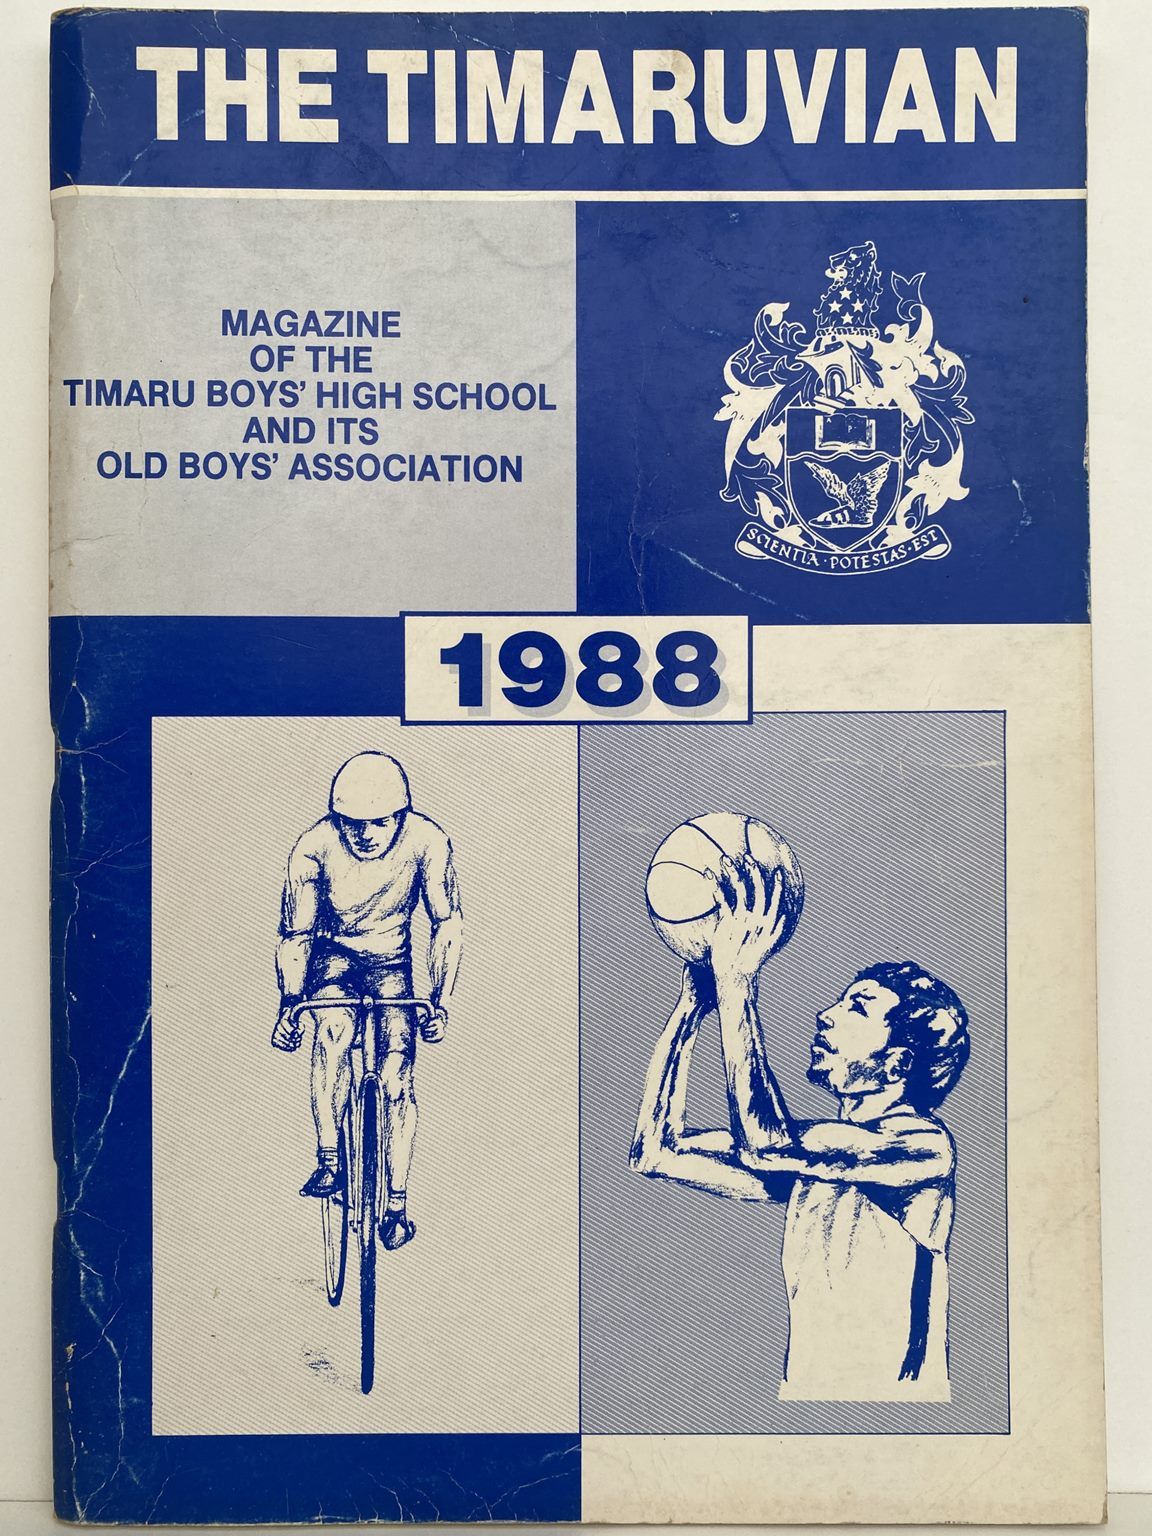 THE TIMARUVIAN: Magazine of the Timaru Boys' High School and its Old Boys' Association 1988